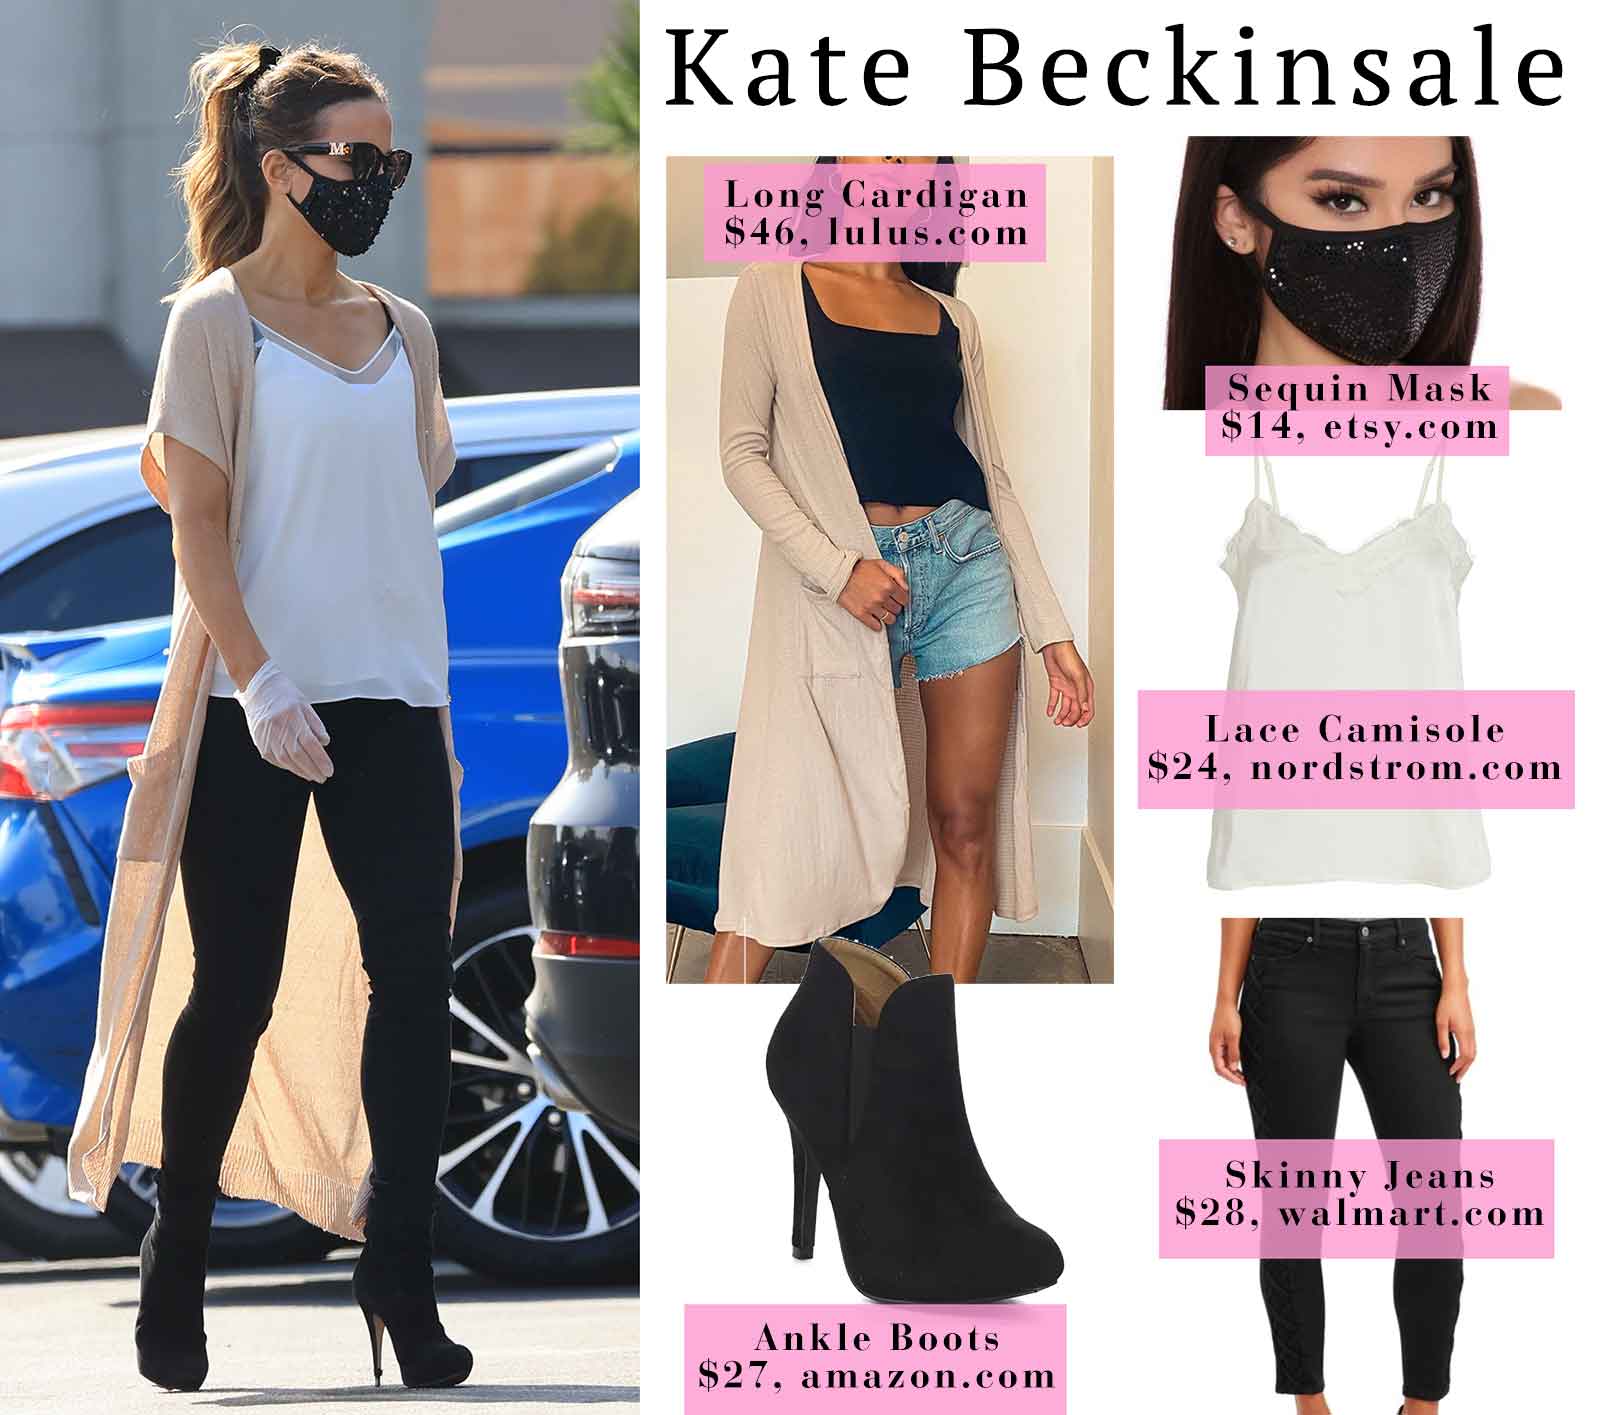 Kate Beckinsale's long cardigan, sequin face mask and stiletto ankle booties look for less